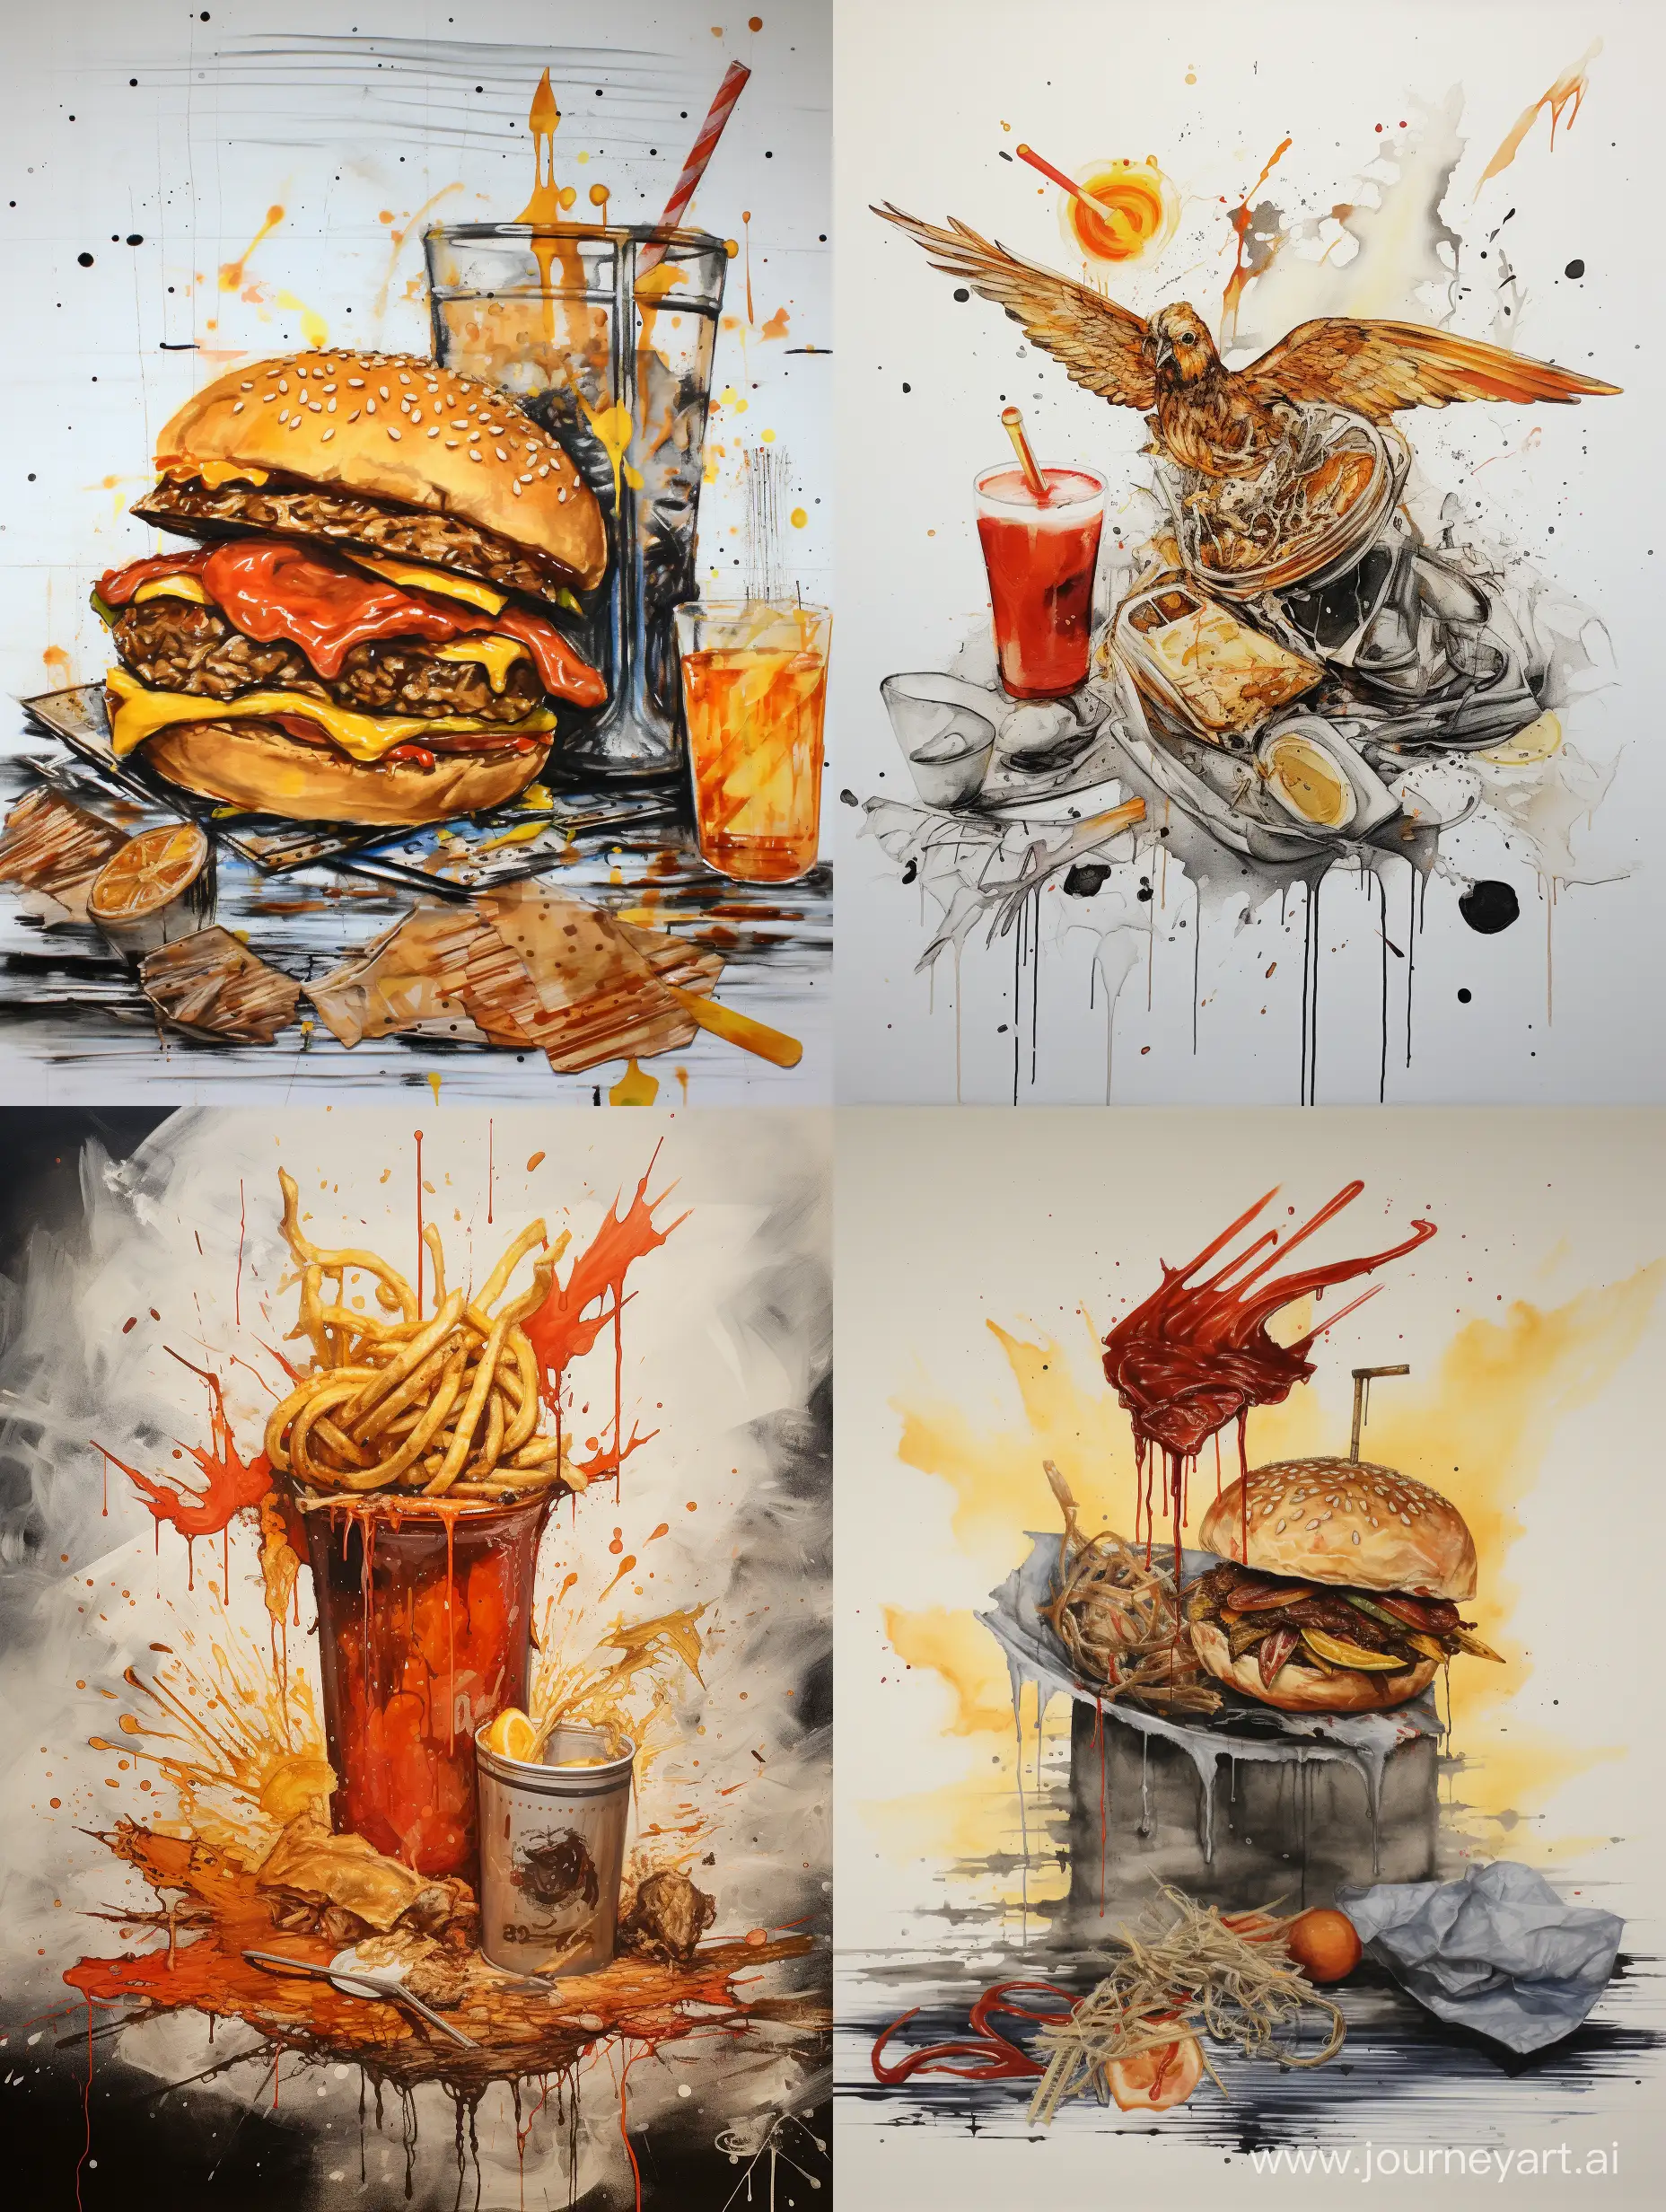 unfinished half-eaten burger, one whiskey tumbler, pages of a manuscript, cigarette butts::1, ashes, mustard spilled, ketchup smeared, fries::2 on a side, bird's eye view, no background, Ralph Steadman's style in ink, erratic, --no faces, --no wine